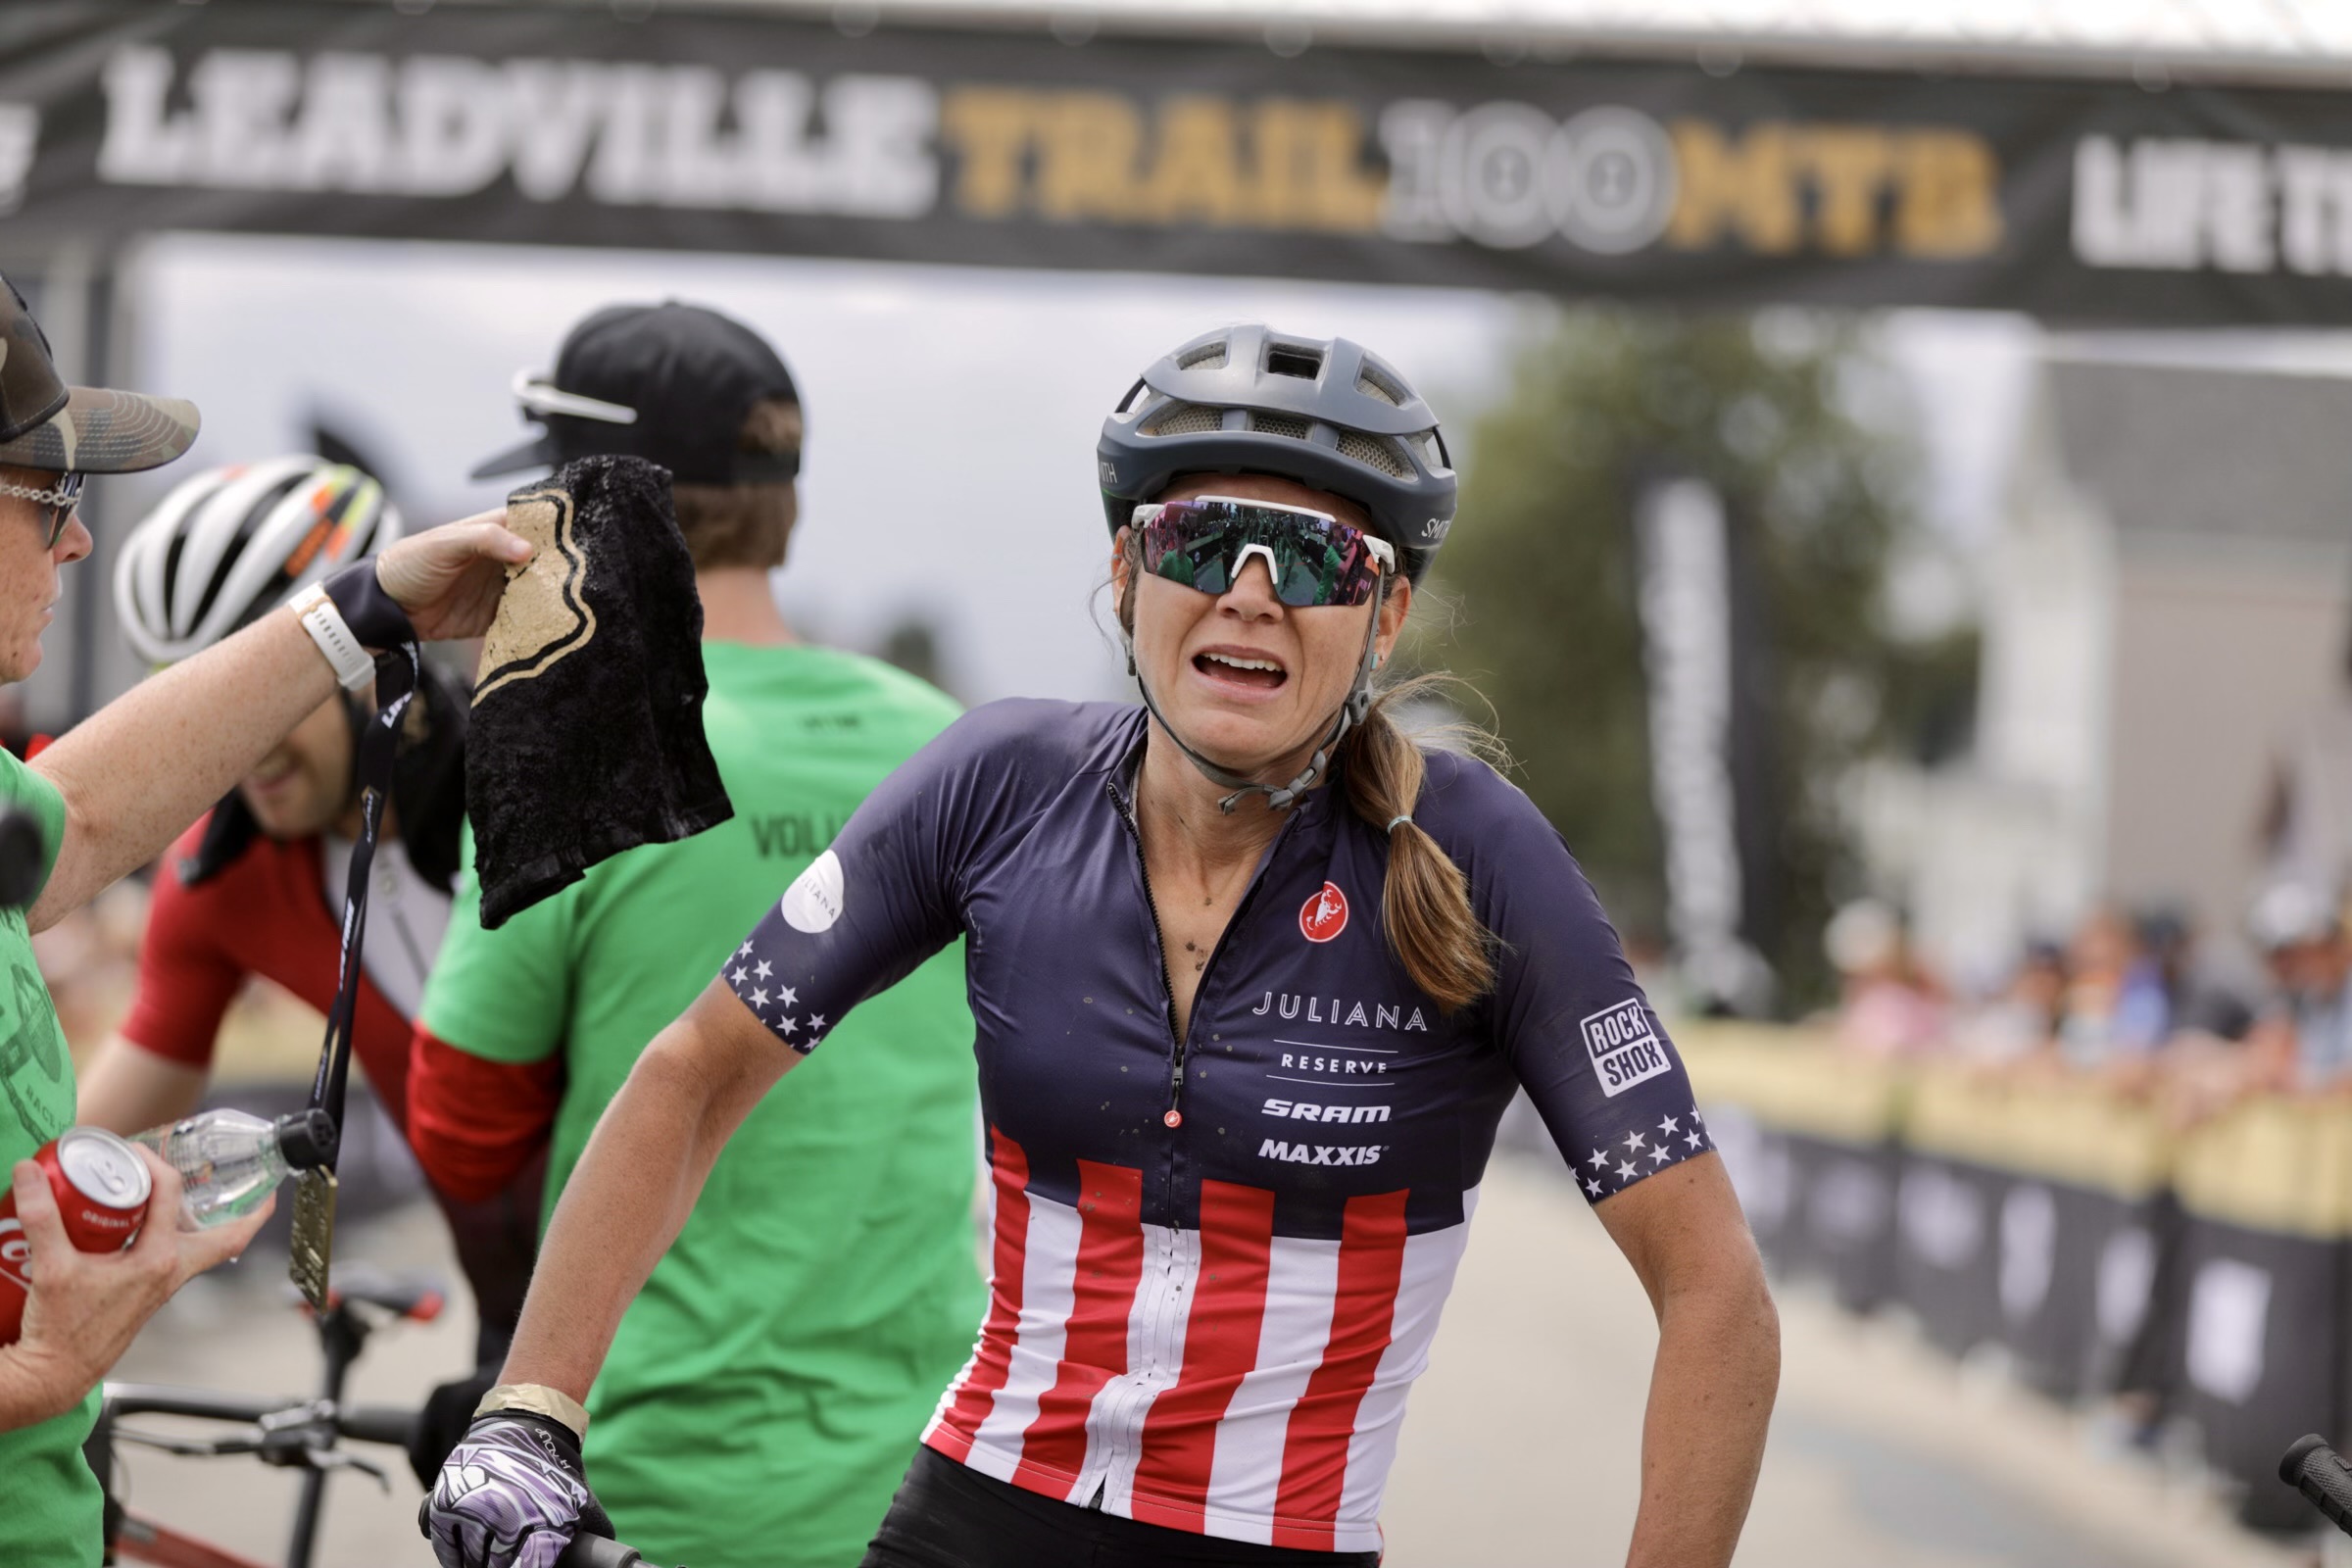 Rose Grant, shortly after winning the 2021 Leadville Trail 100. Photo courtesy Life Time